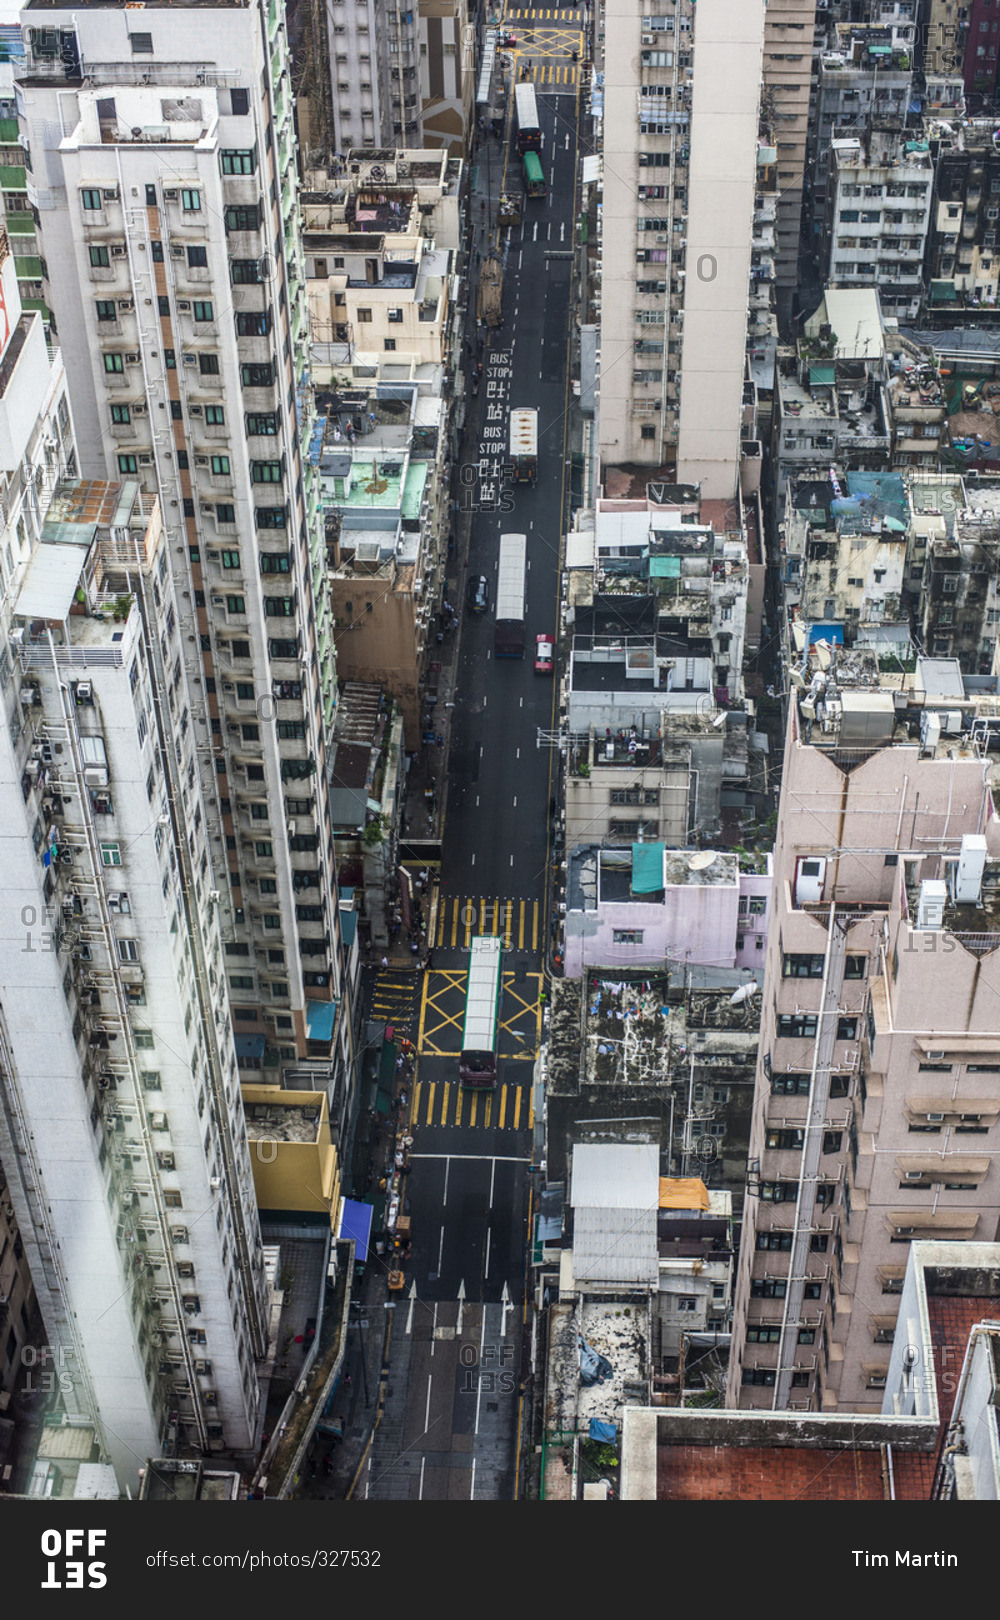 Hong Kong street crowded with high rise office and residential buildings